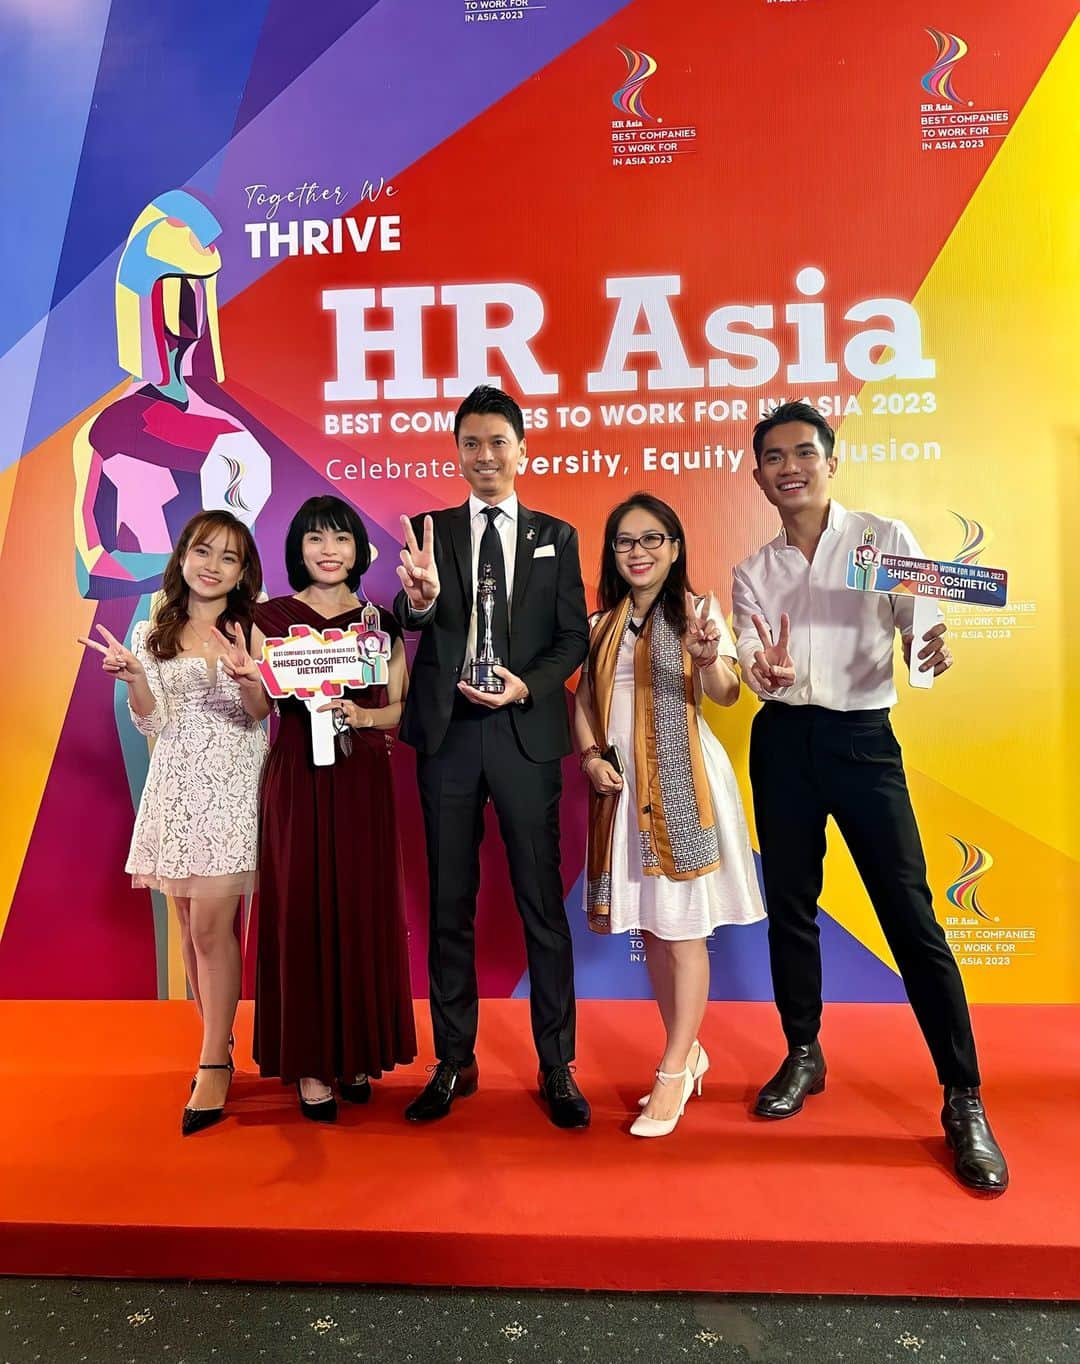 資生堂 Shiseido Group Shiseido Group Official Instagramさんのインスタグラム写真 - (資生堂 Shiseido Group Shiseido Group Official InstagramInstagram)「Shiseido Cosmetics Vietnam (SCV) has been awarded the "Best Companies to Work for in Asia 2023" for the second consecutive year in a survey conducted by HR Asia Magazine.  The theme of the survey this year is "Celebrating Diversity, Equity and Inclusion," recognizing enterprises that support these values. “  At Shiseido, people always come first, and we strive to create a diverse, equitable, and inclusive workplace where individual is valued and empowered.  Together, as One Shiseido, we aim to achieve our common goals.” - Koji Nakata, Managing Director, SCV.  資生堂コスメティックスベトナム（SCV）は、HR Asia Magazineによる調査で「2023年アジアで働きたい会社」に2年連続で選ばれました。  今年のテーマは「ダイバーシティ、エクイティ、インクルージョン」で、これらの価値を推進する企業が表彰されました。  「当社では常に社員を中心に据え、一人ひとりが尊重されることを重視しています。One Shiseidoとして共通のゴールに向け、個々が力を発揮できる職場環境の創出を目指しています。」 - SCV取締役社長 中田幸治  #shiseidocosmeticvietnam #peoplefirst」9月15日 15時28分 - shiseido_corp